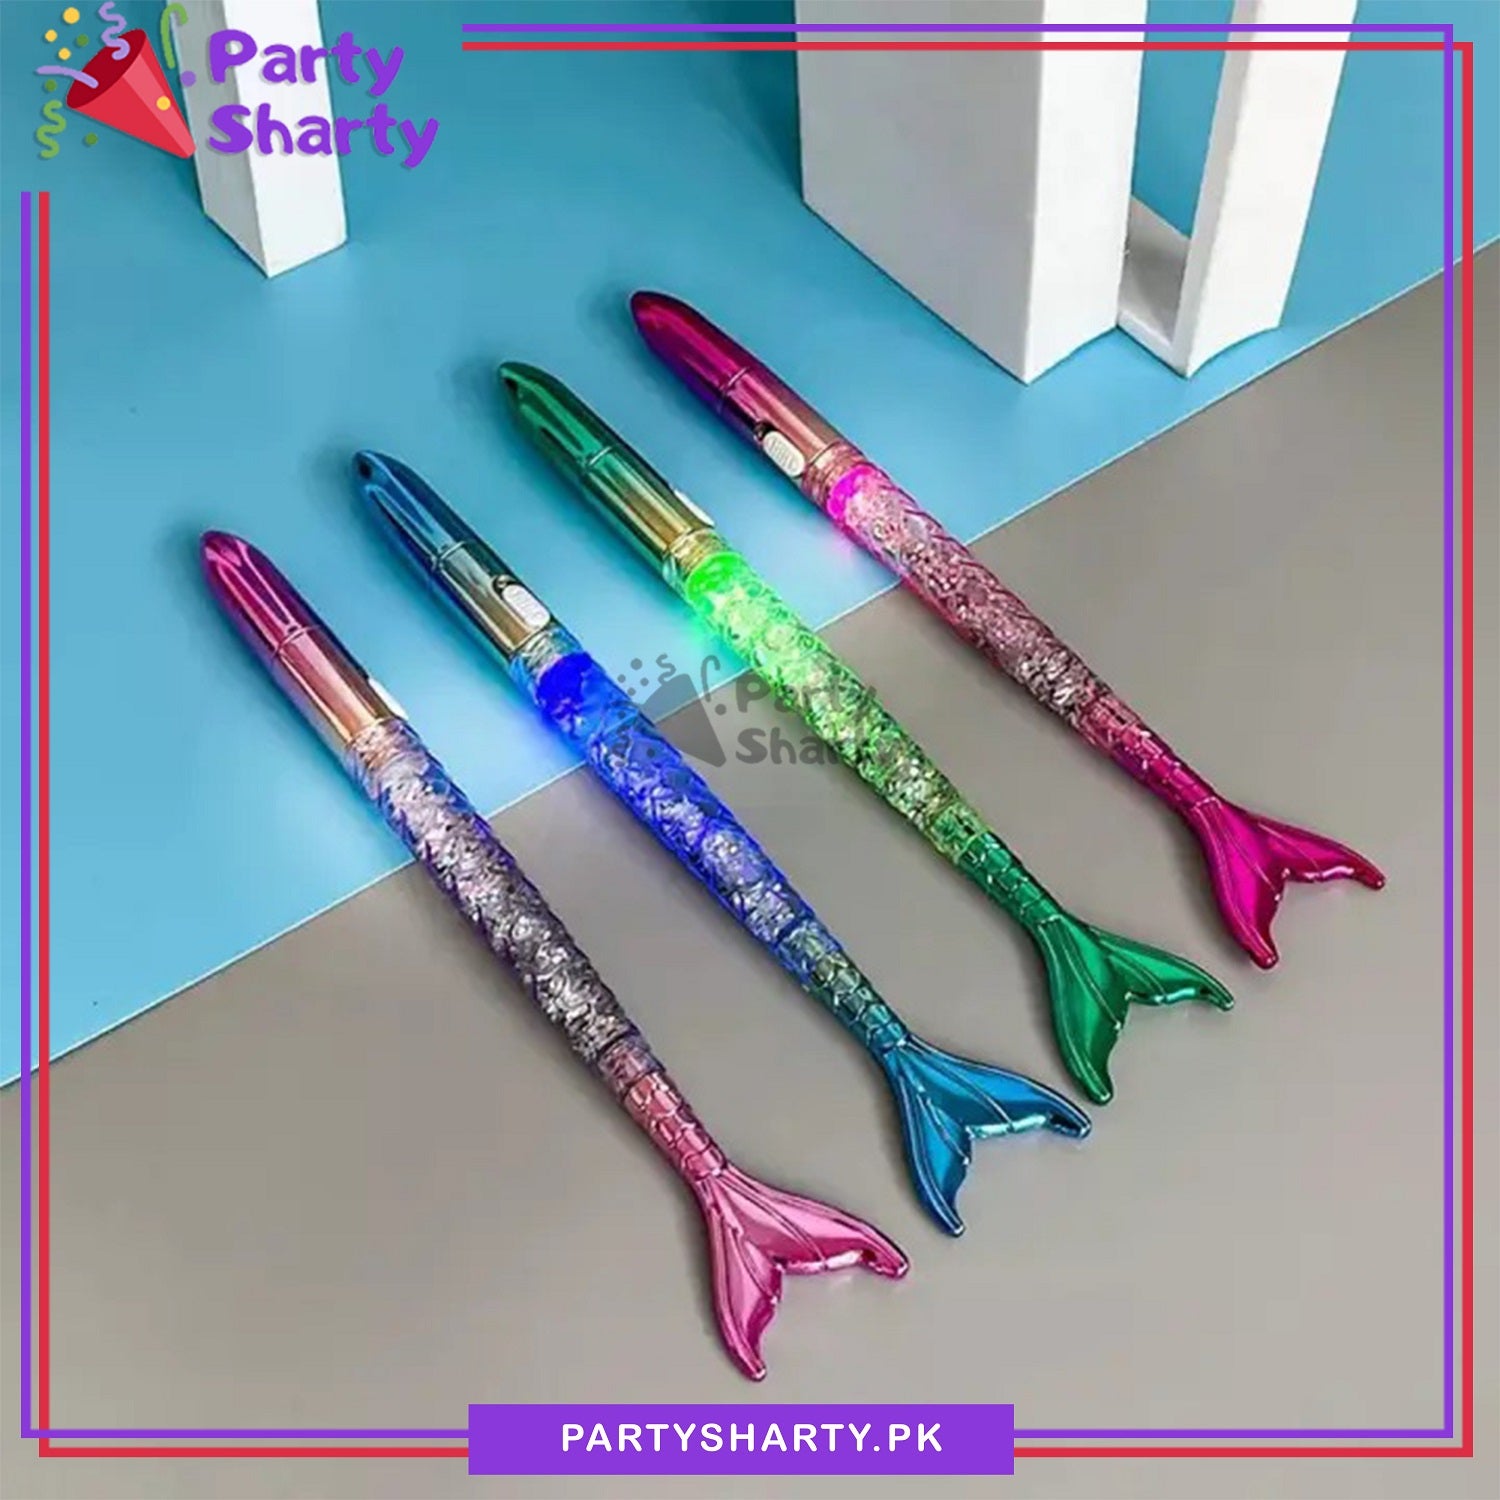 LED Mermaid Themed Gel Pens Filled with Water and Glitter For Kids / Stationery Sets / Birthday Return Gift Items